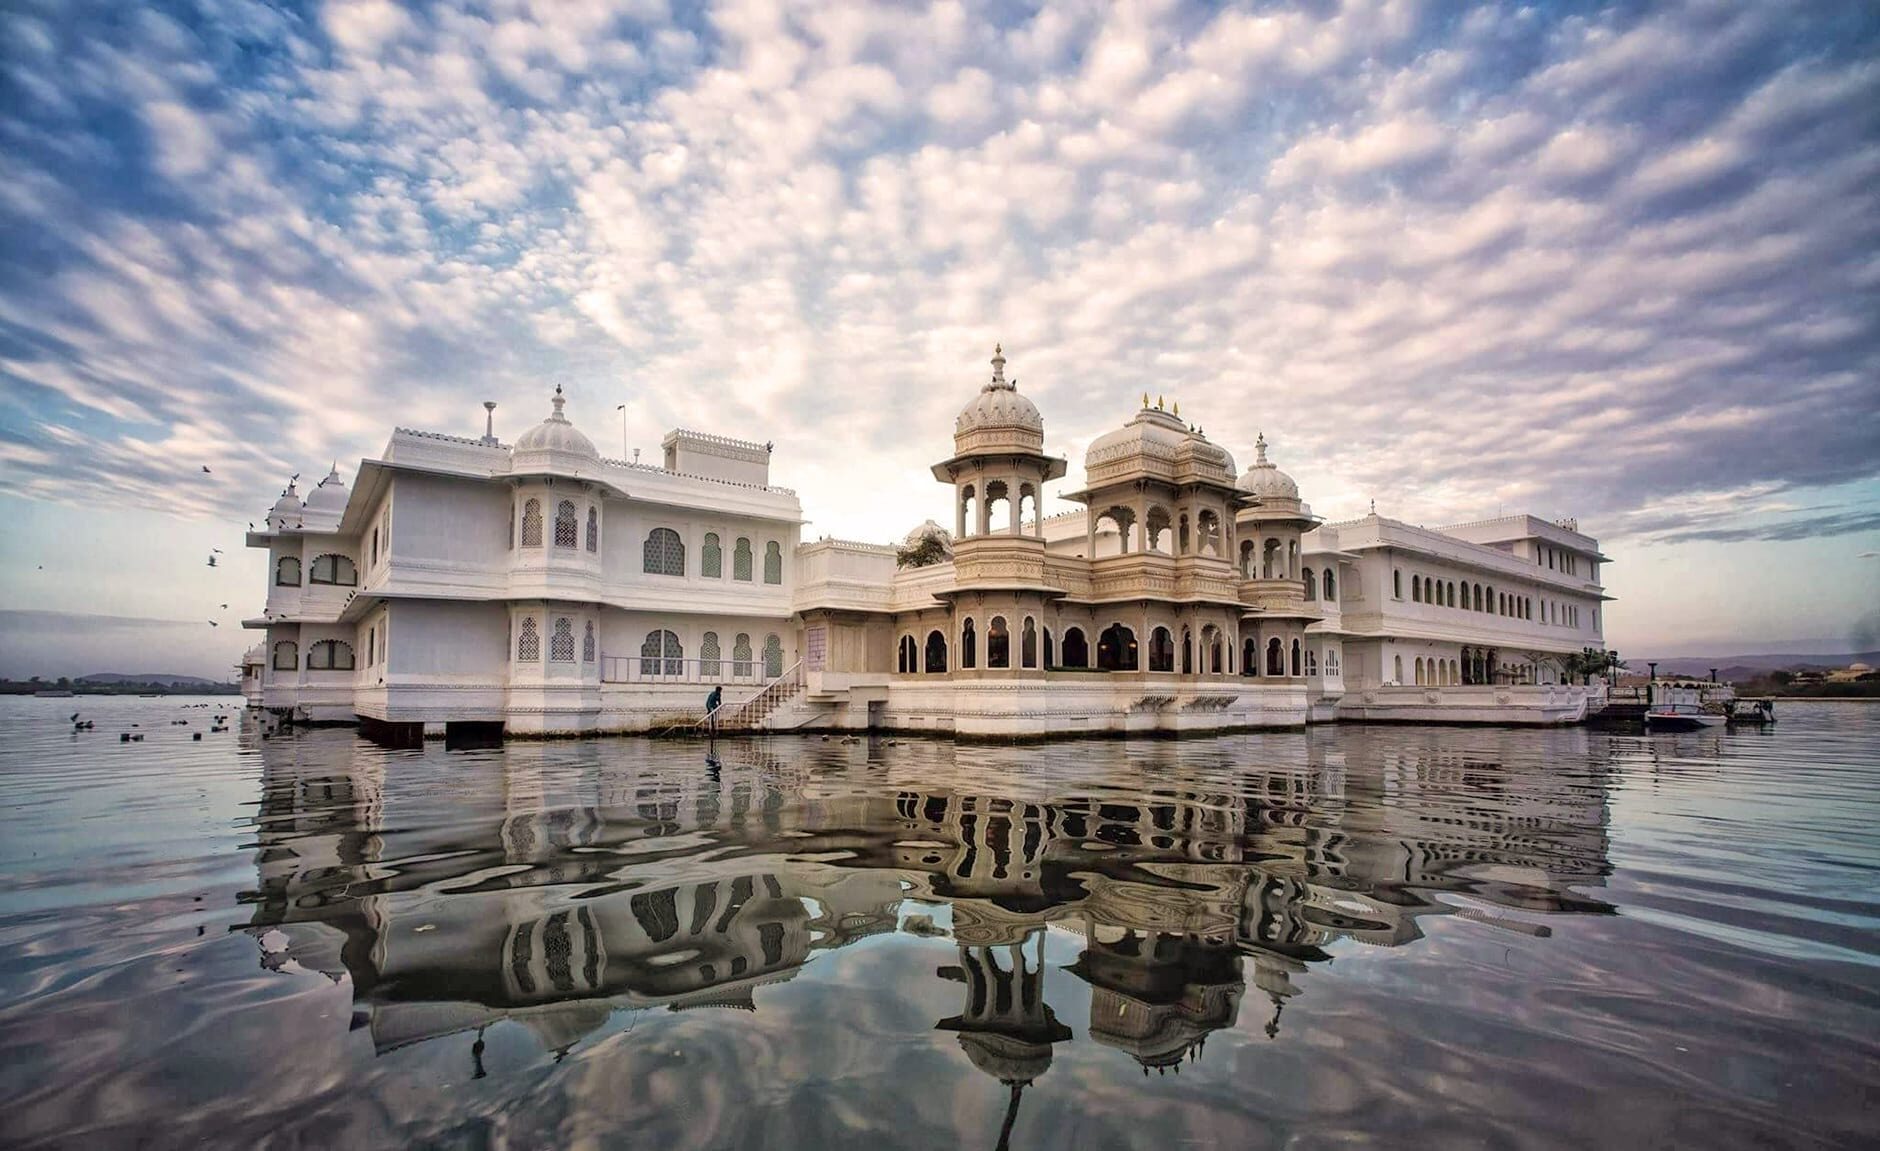 Scenic places in Udaipur that can up your social media game!